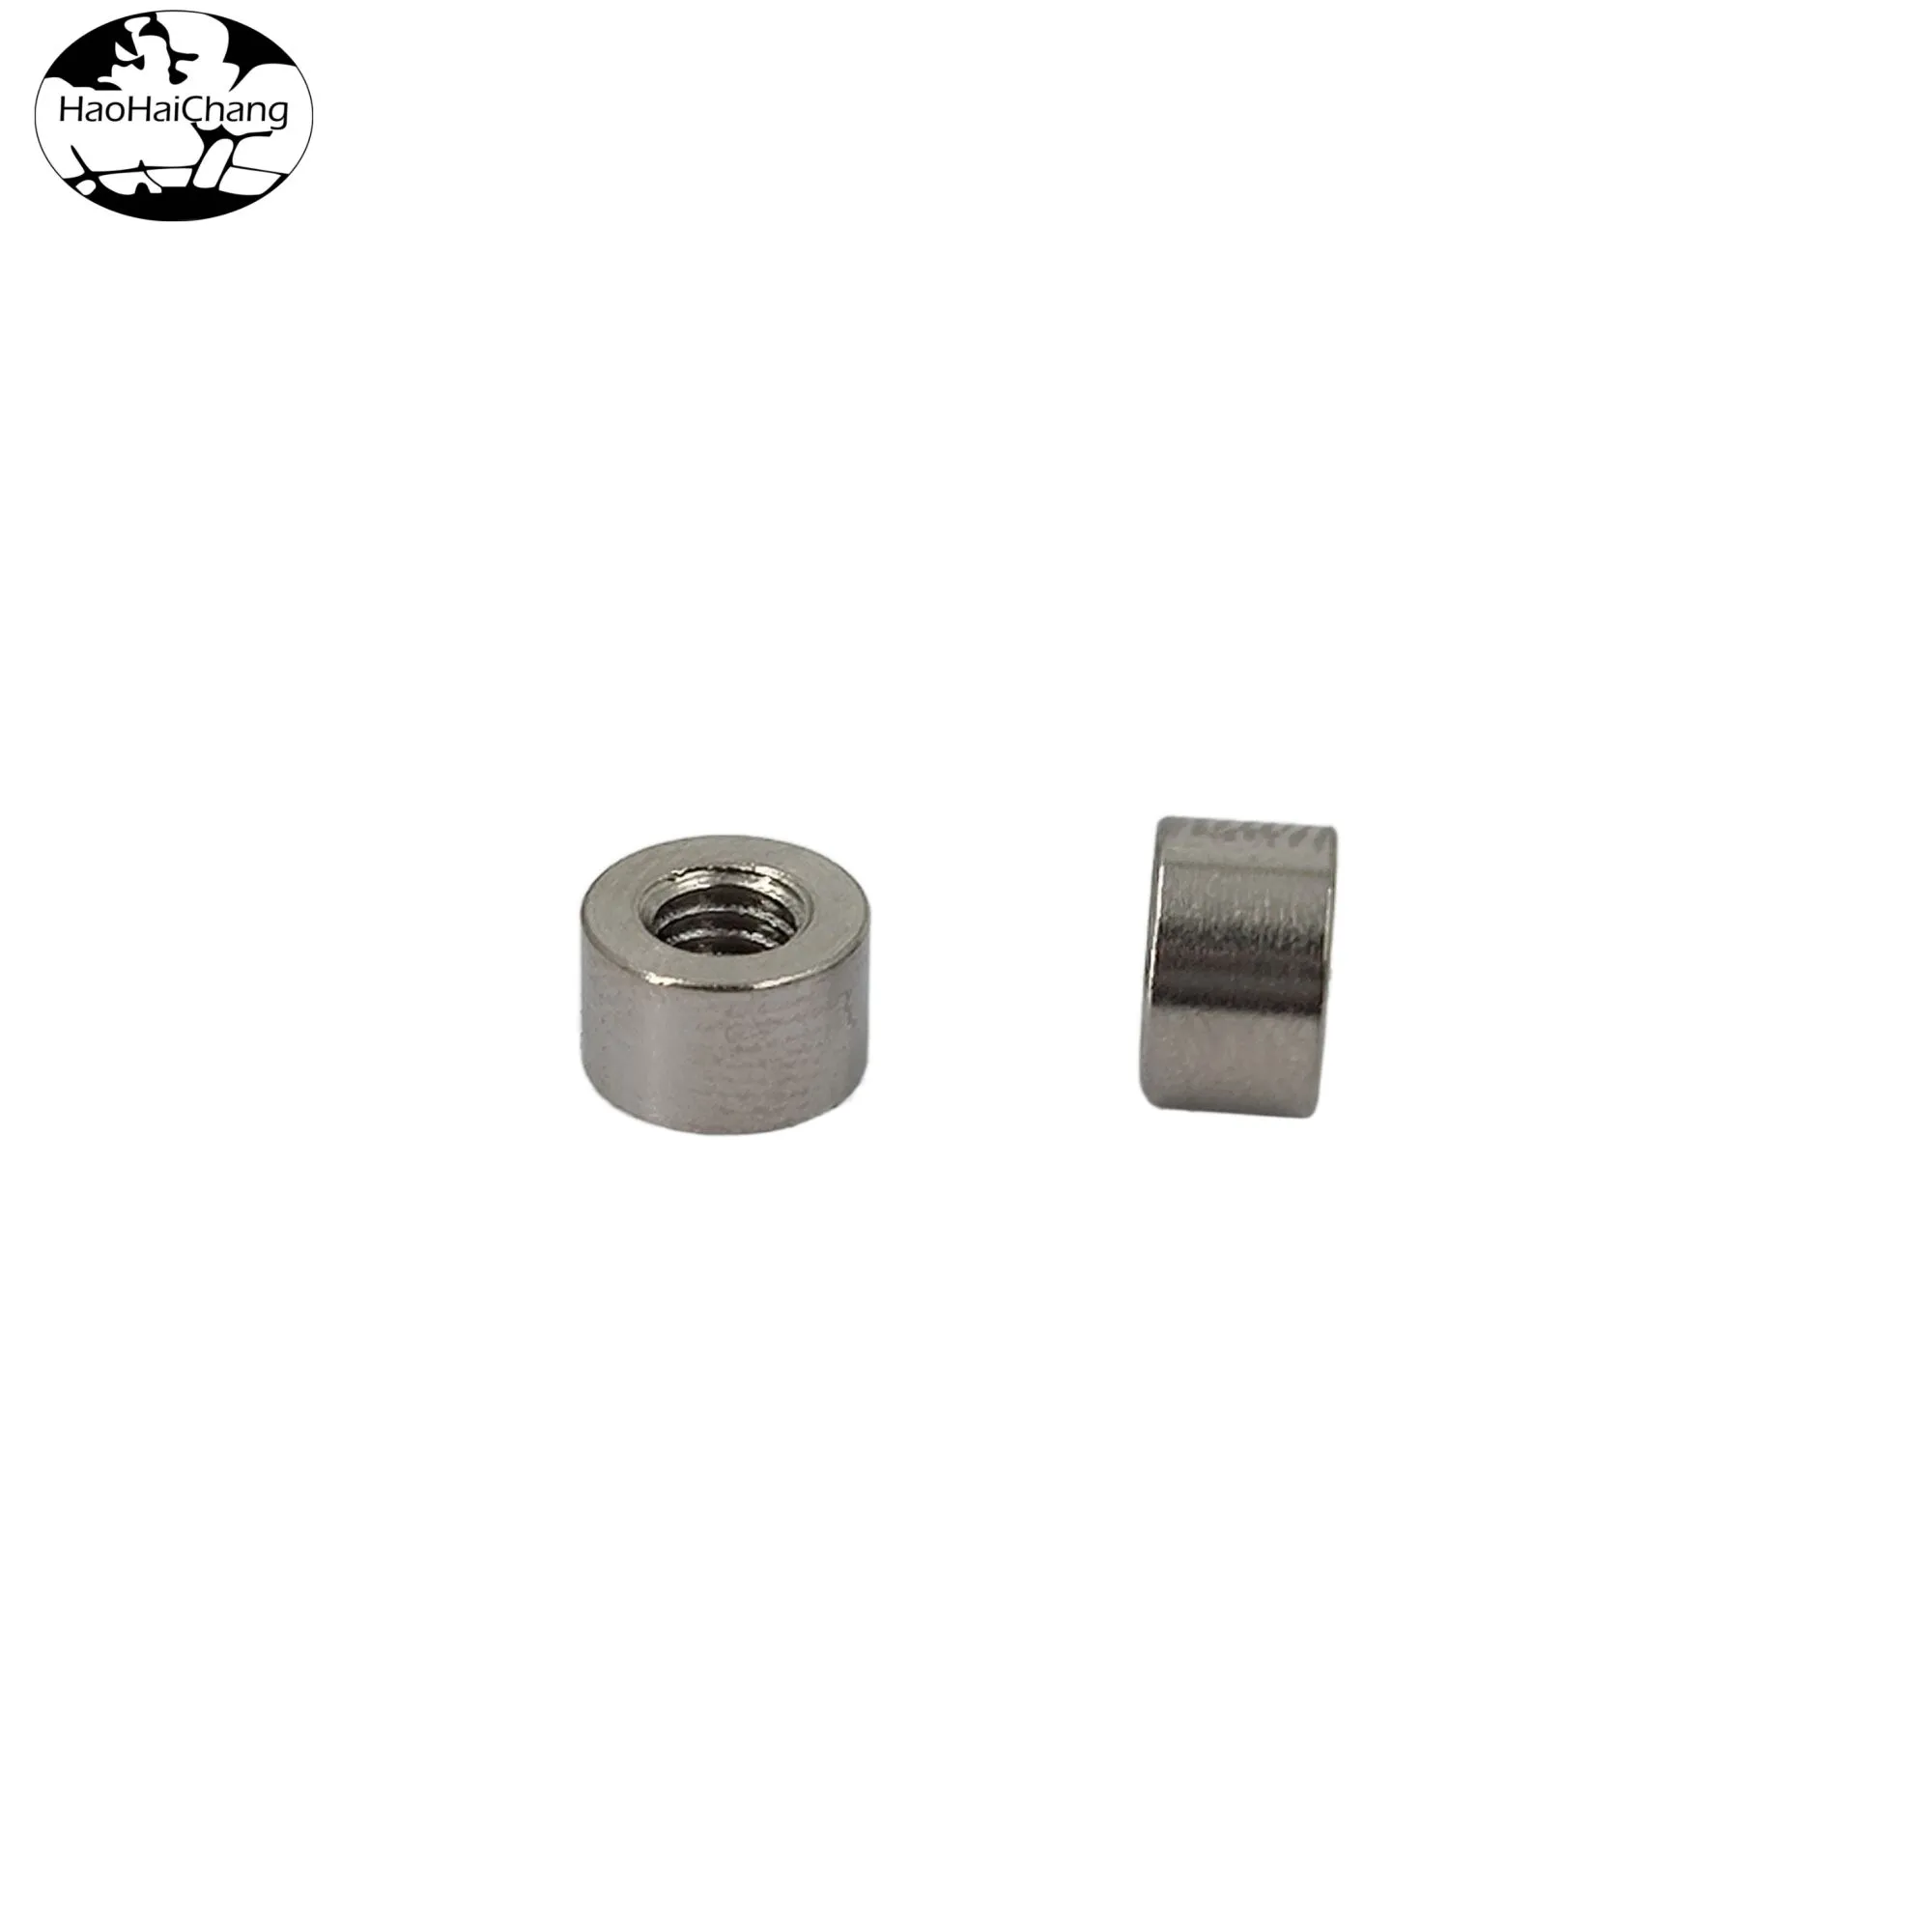 HHC-612 Stainless Steel Round Nut Connecting Nut Cylindrical Screw Joint